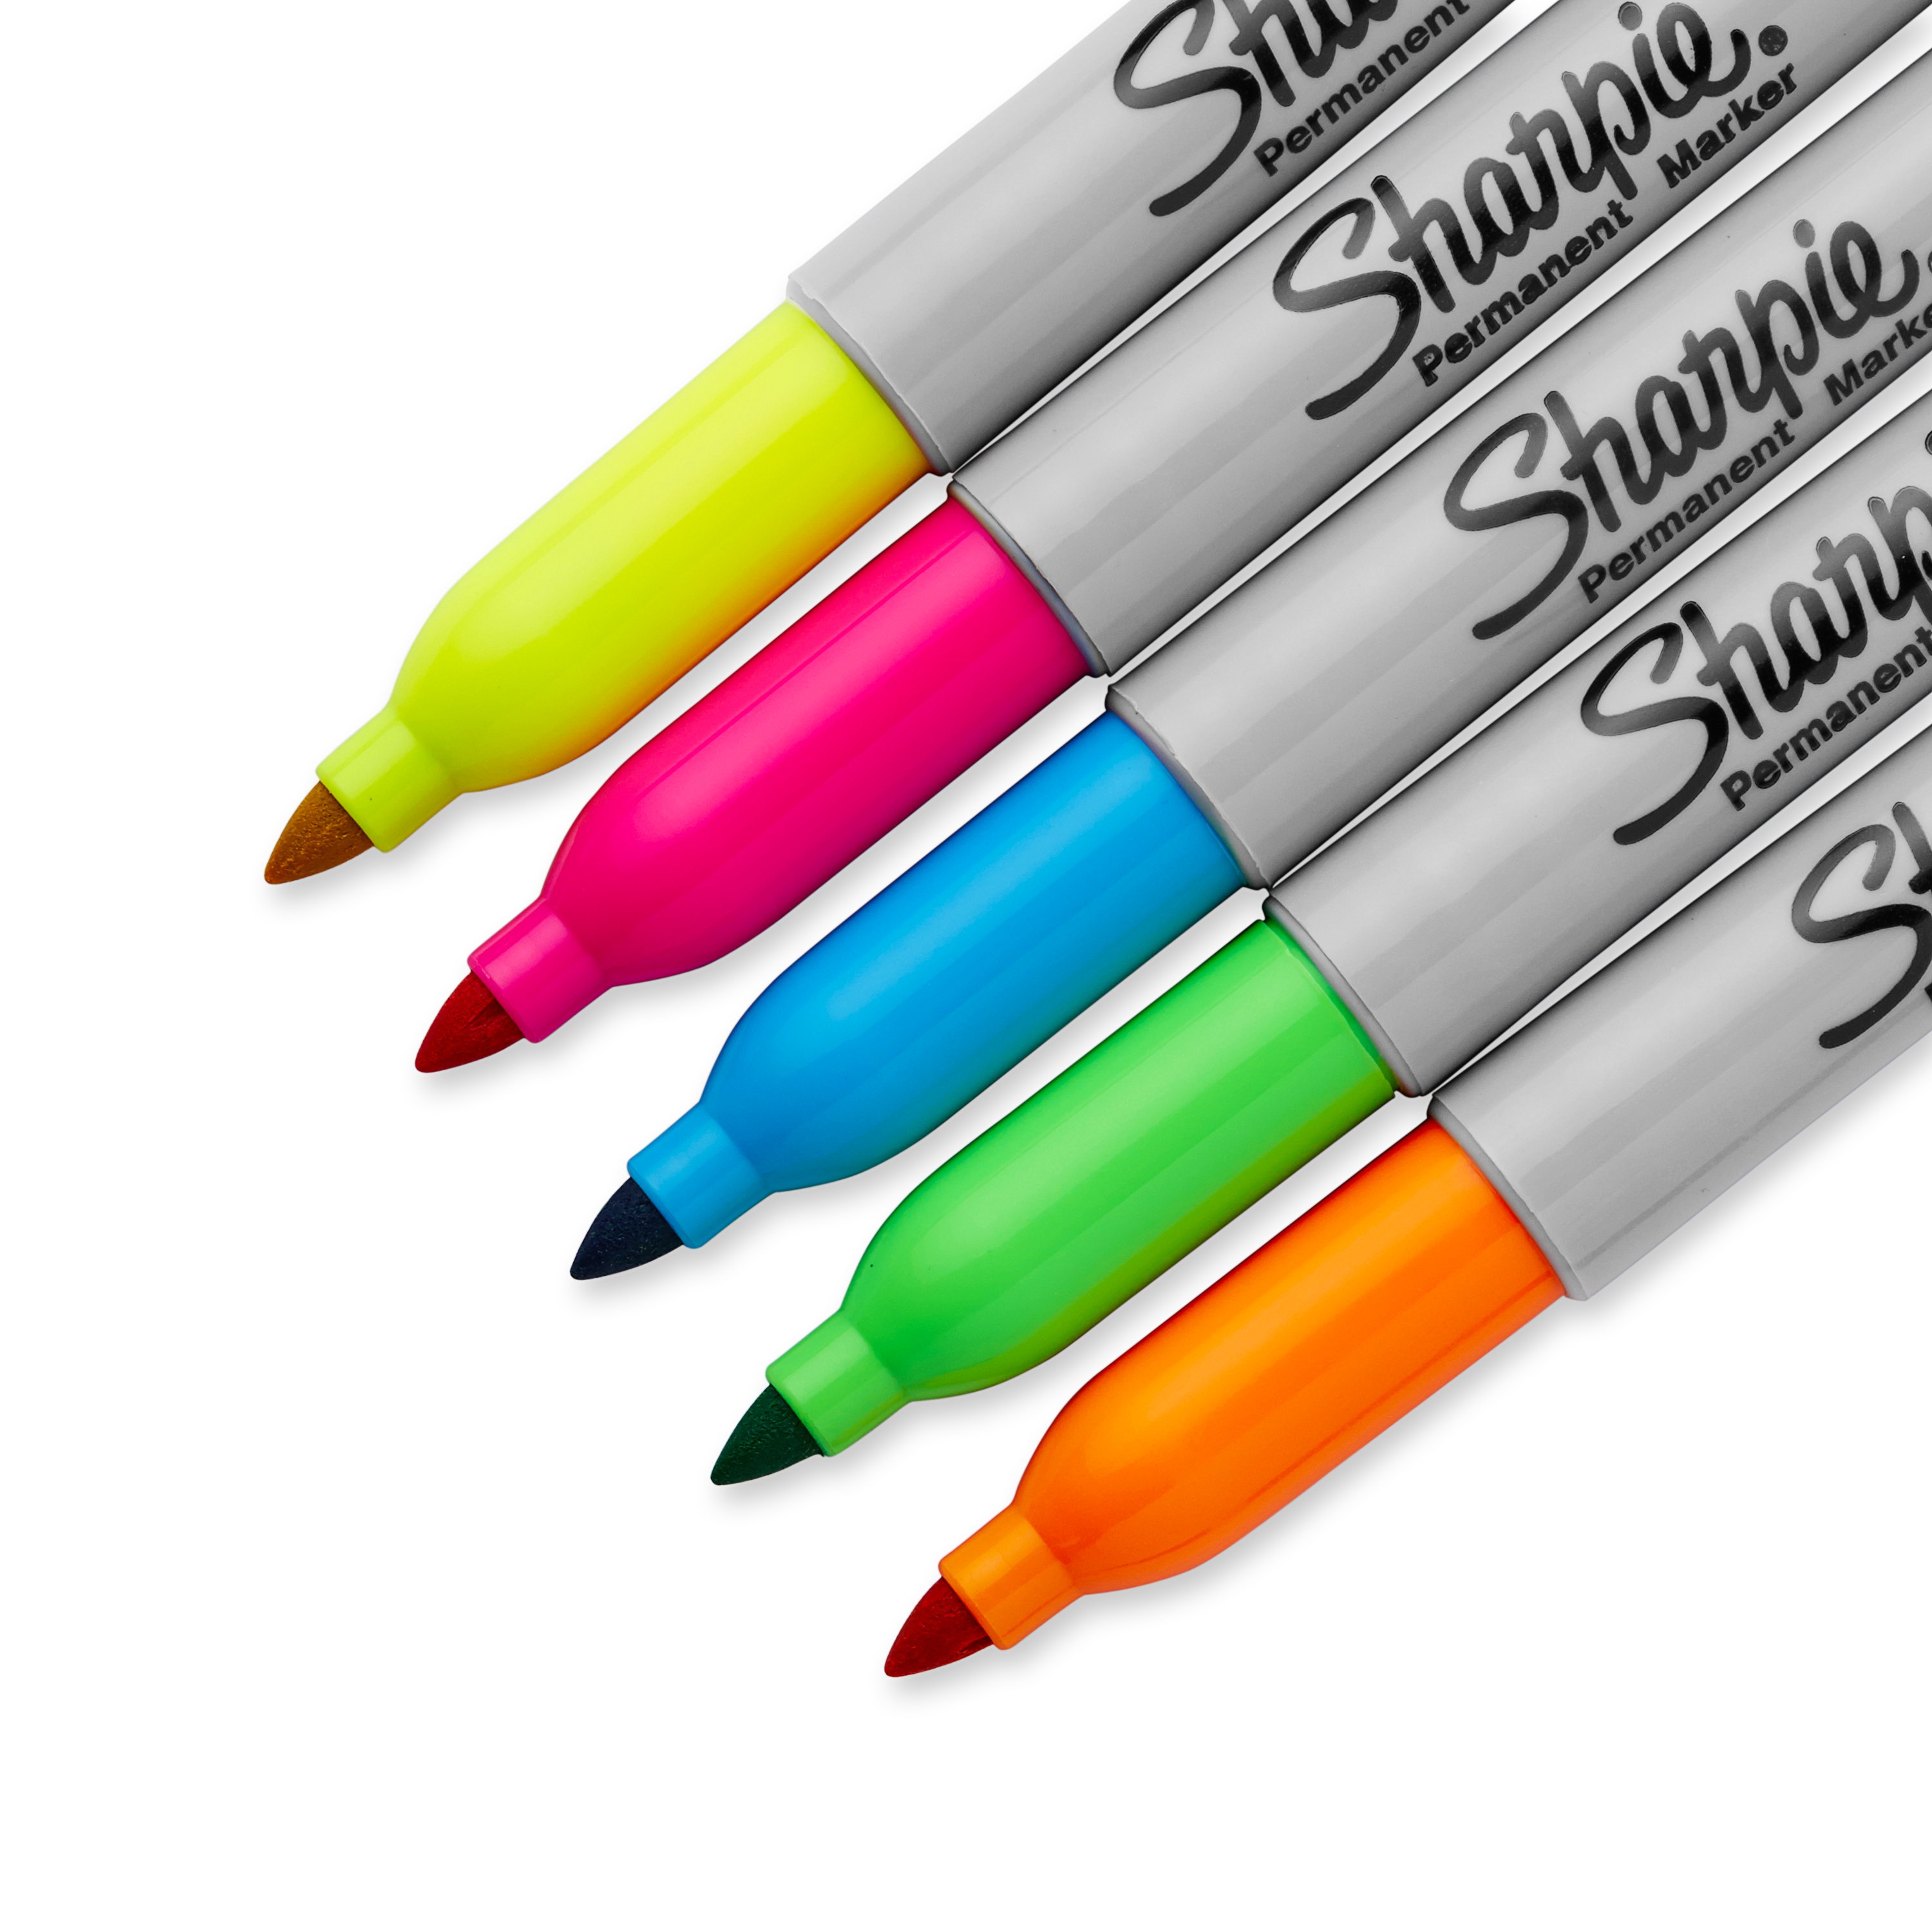 Signature Neon Light Effect Markers, 7 Count